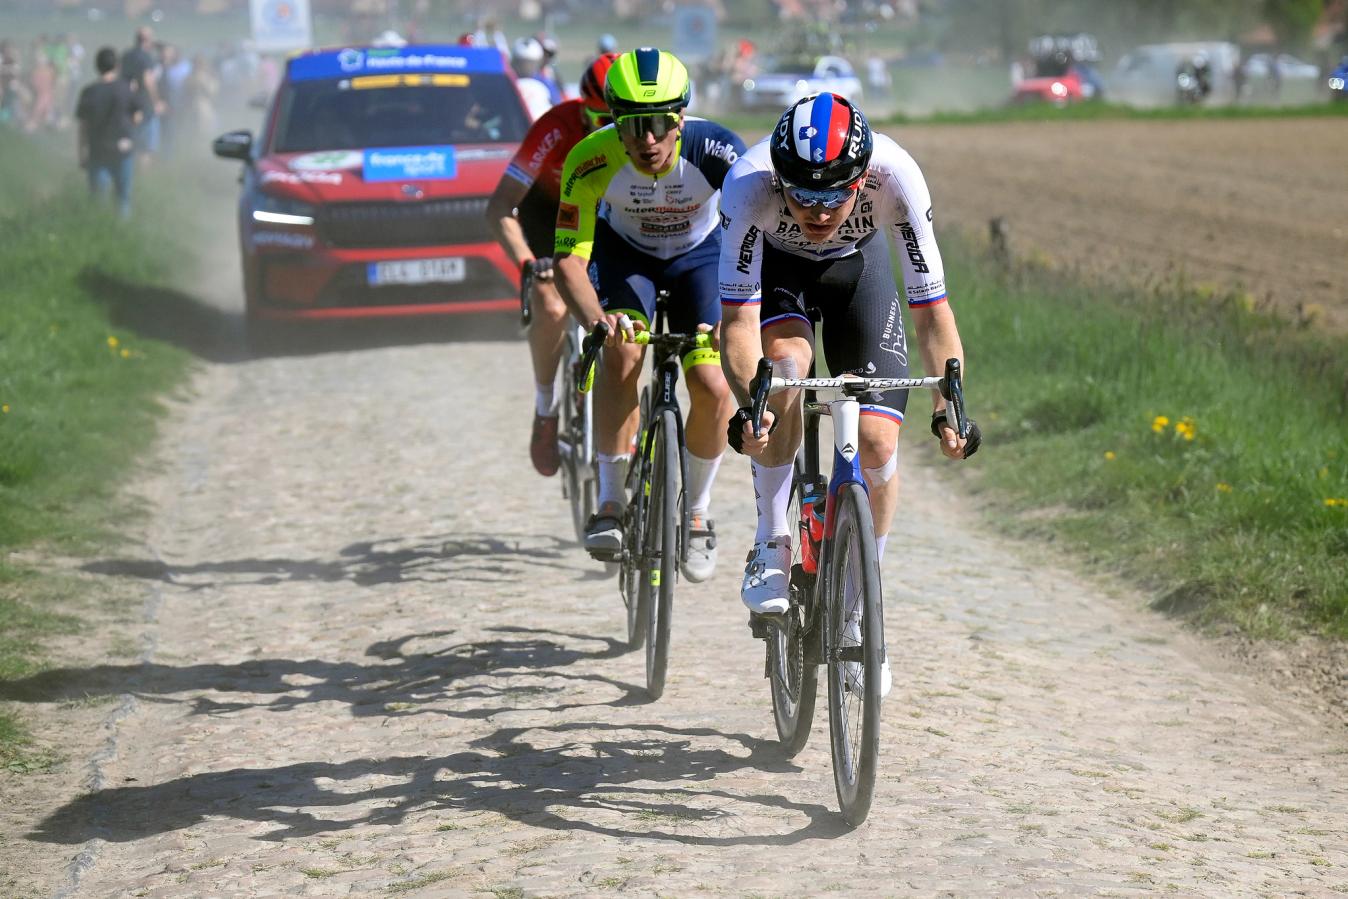 Mohorič at the 2022 Paris-Roubaix, where he was one of the first riders to run 32mm tyres